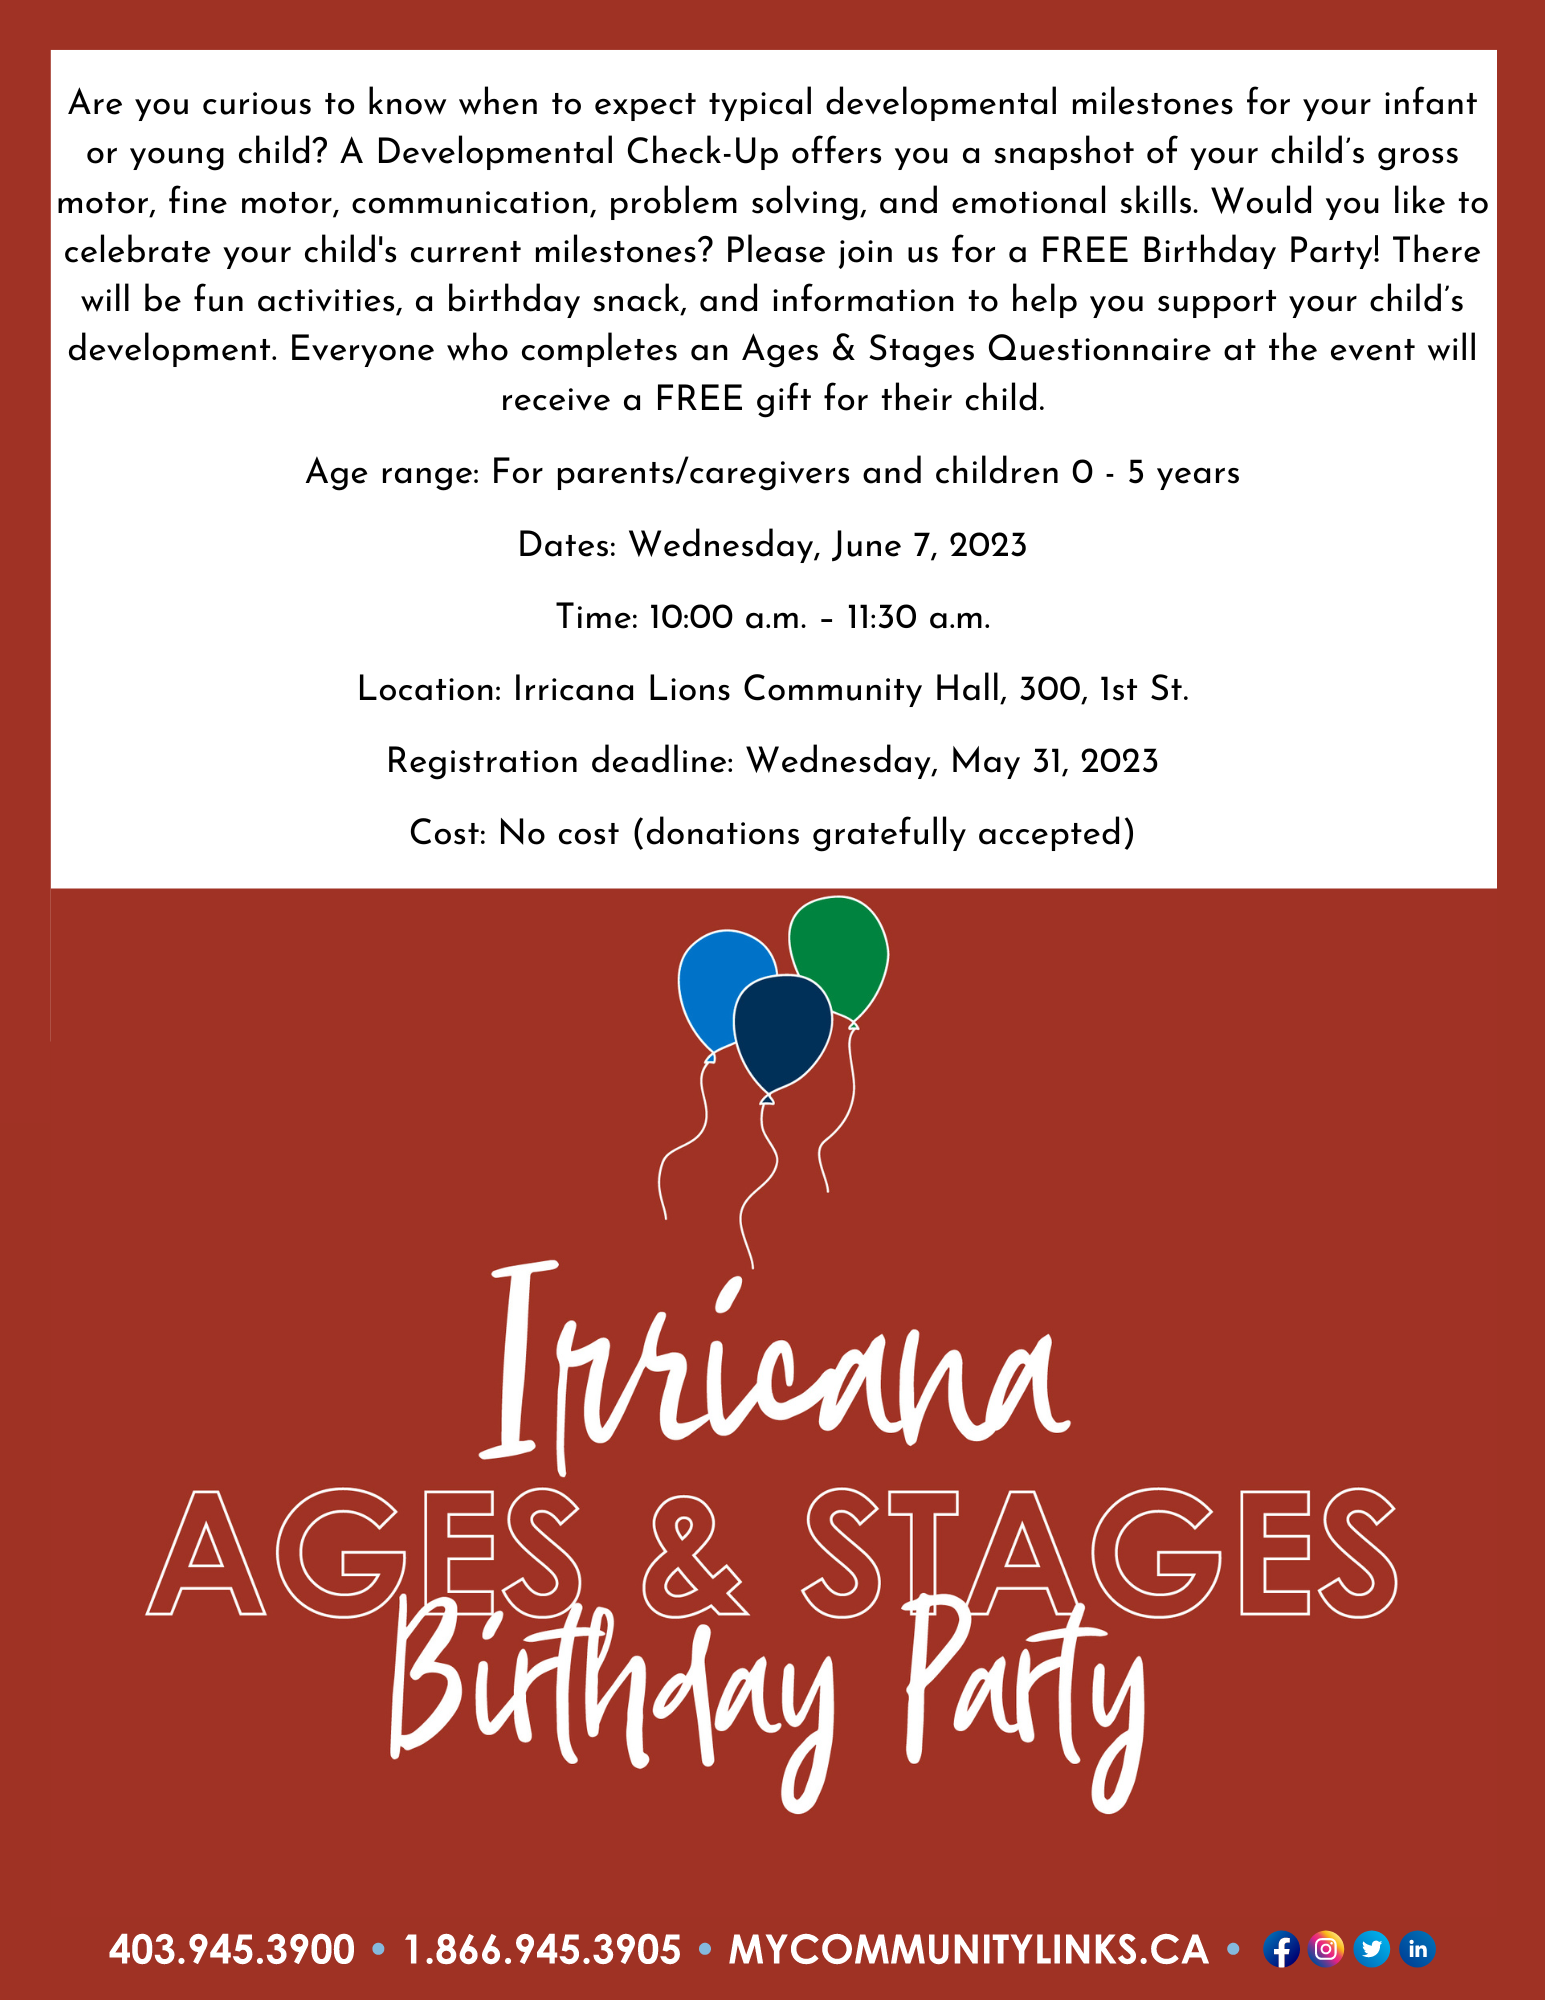 Irricana Ages & Stages Birthday Party June 7, 2023